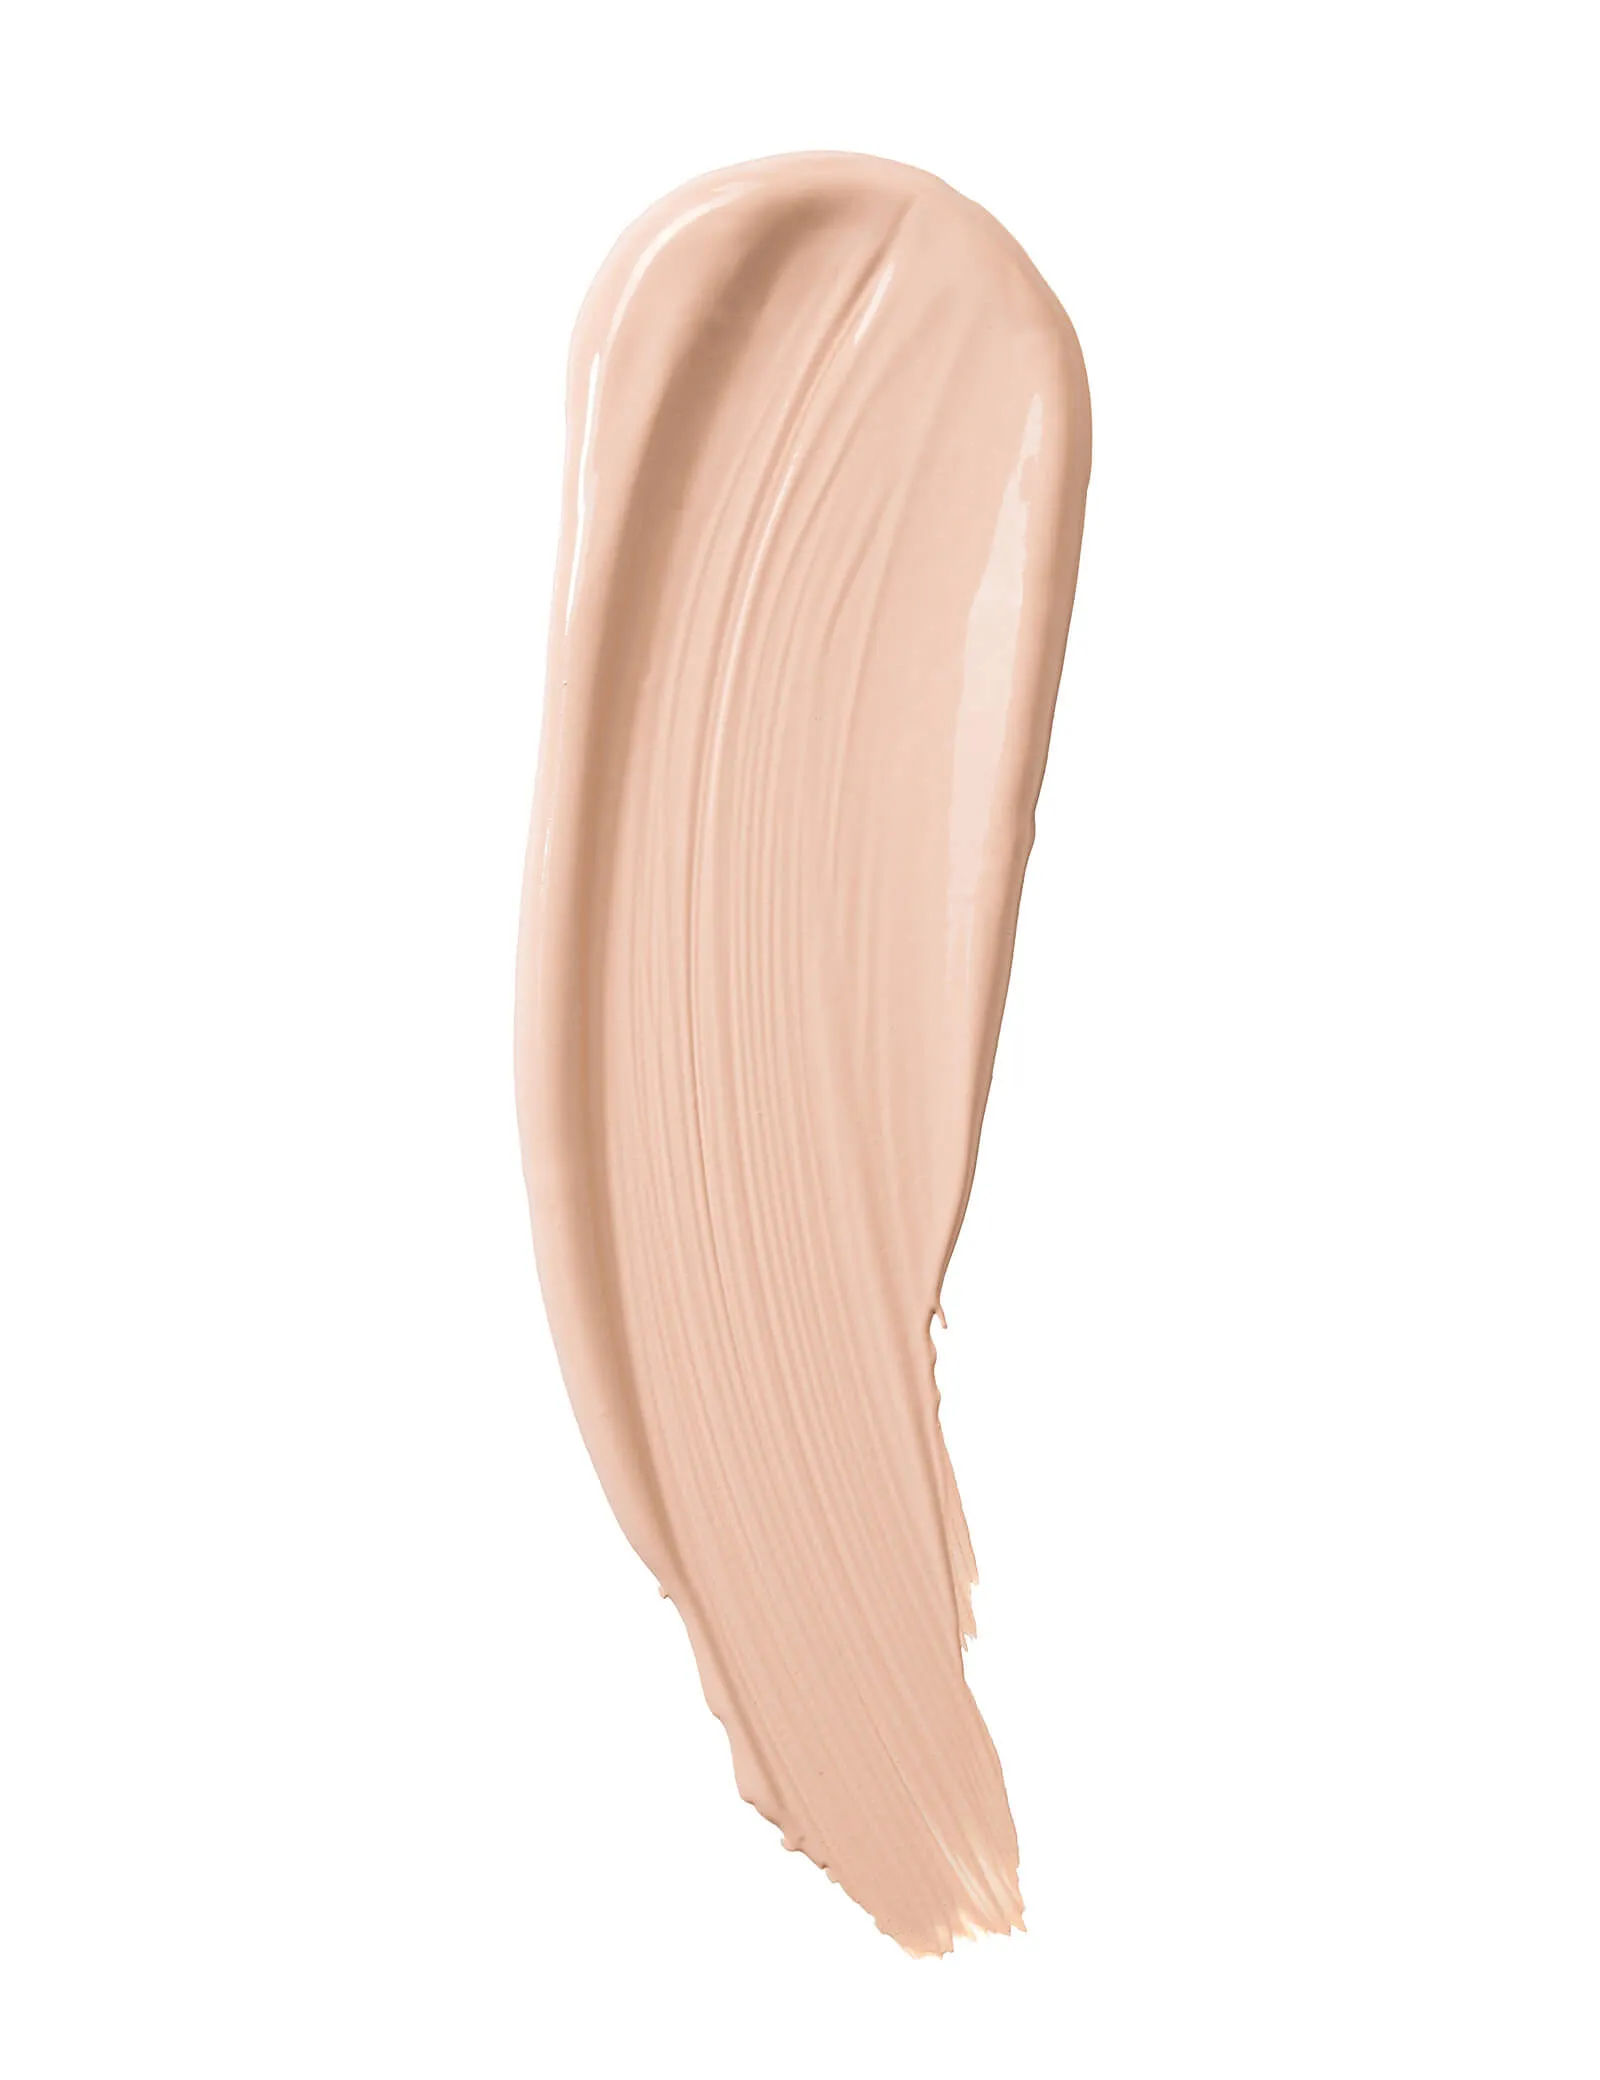 Buy Flormar Perfect Coverage Foundation SPF15 · USA